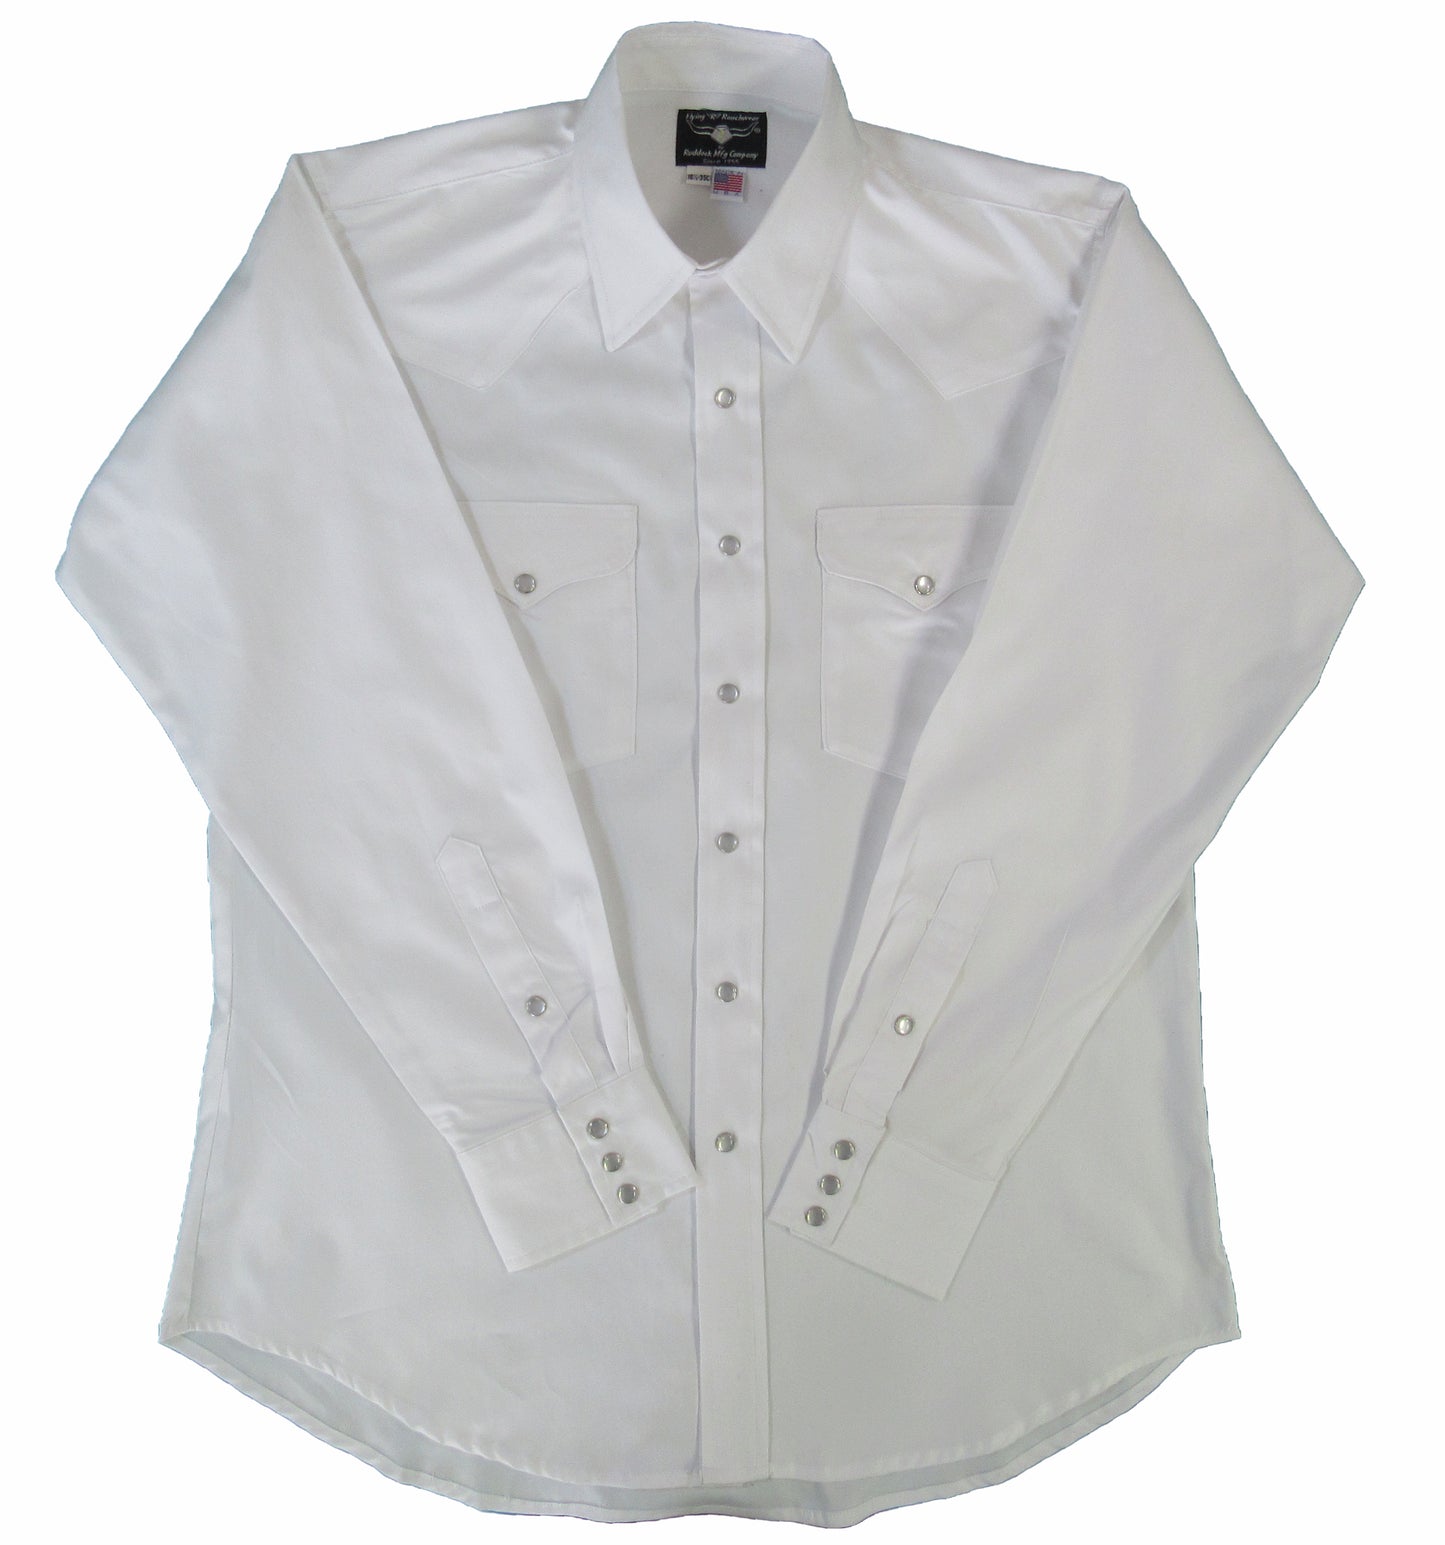 Flying R Ranchwear - Primo Pinpoint Oxford - White - Long Sleeve